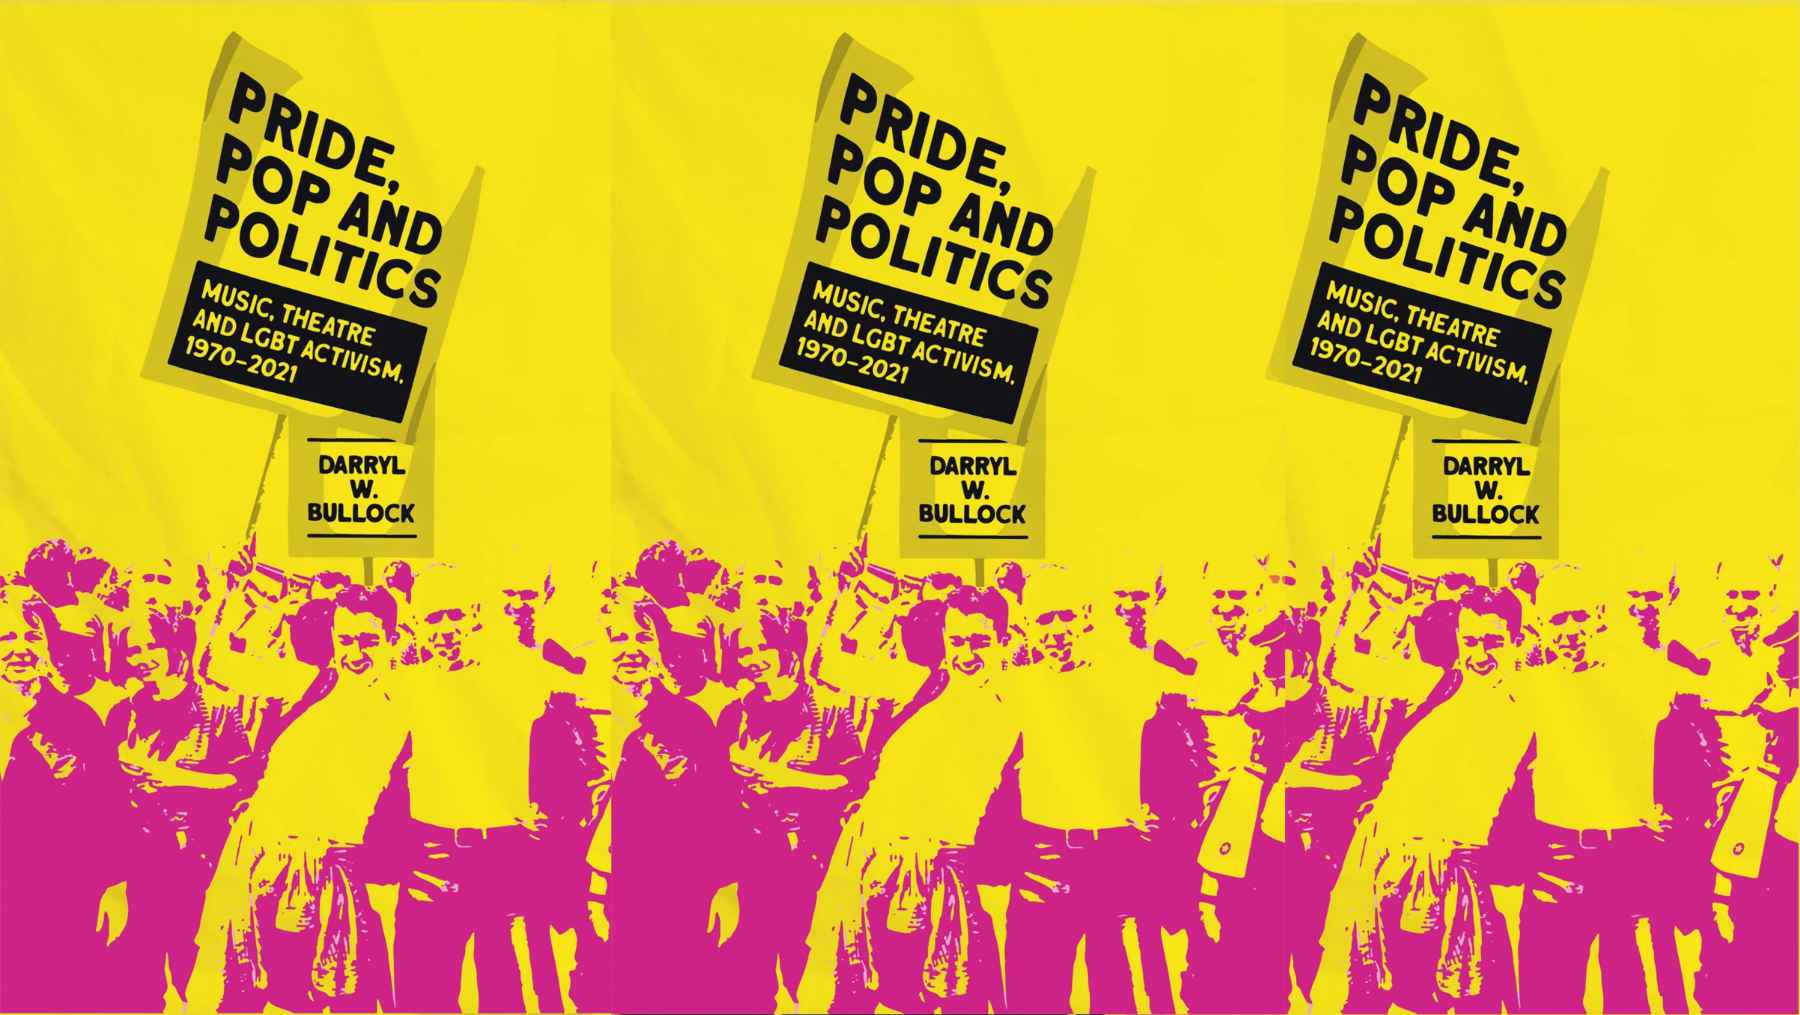 Pride Pop and Politics Penderyn Prize winning author Darryl W. Bullock's new book on LGBTQ Arts and Music activism